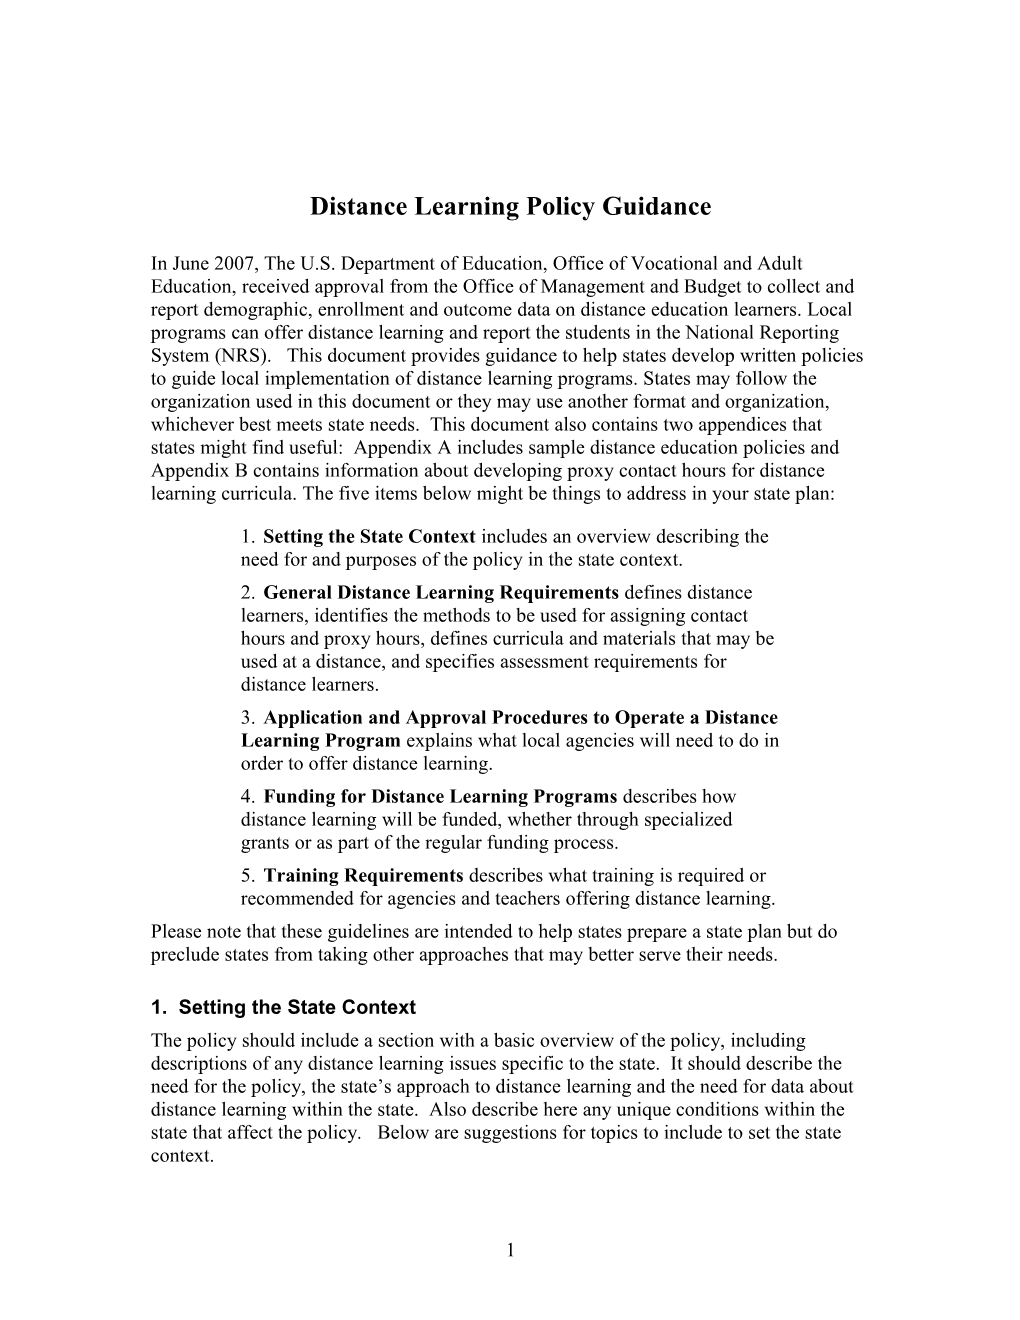 Distance Learning Policy Guidance April 2008 (Msword)